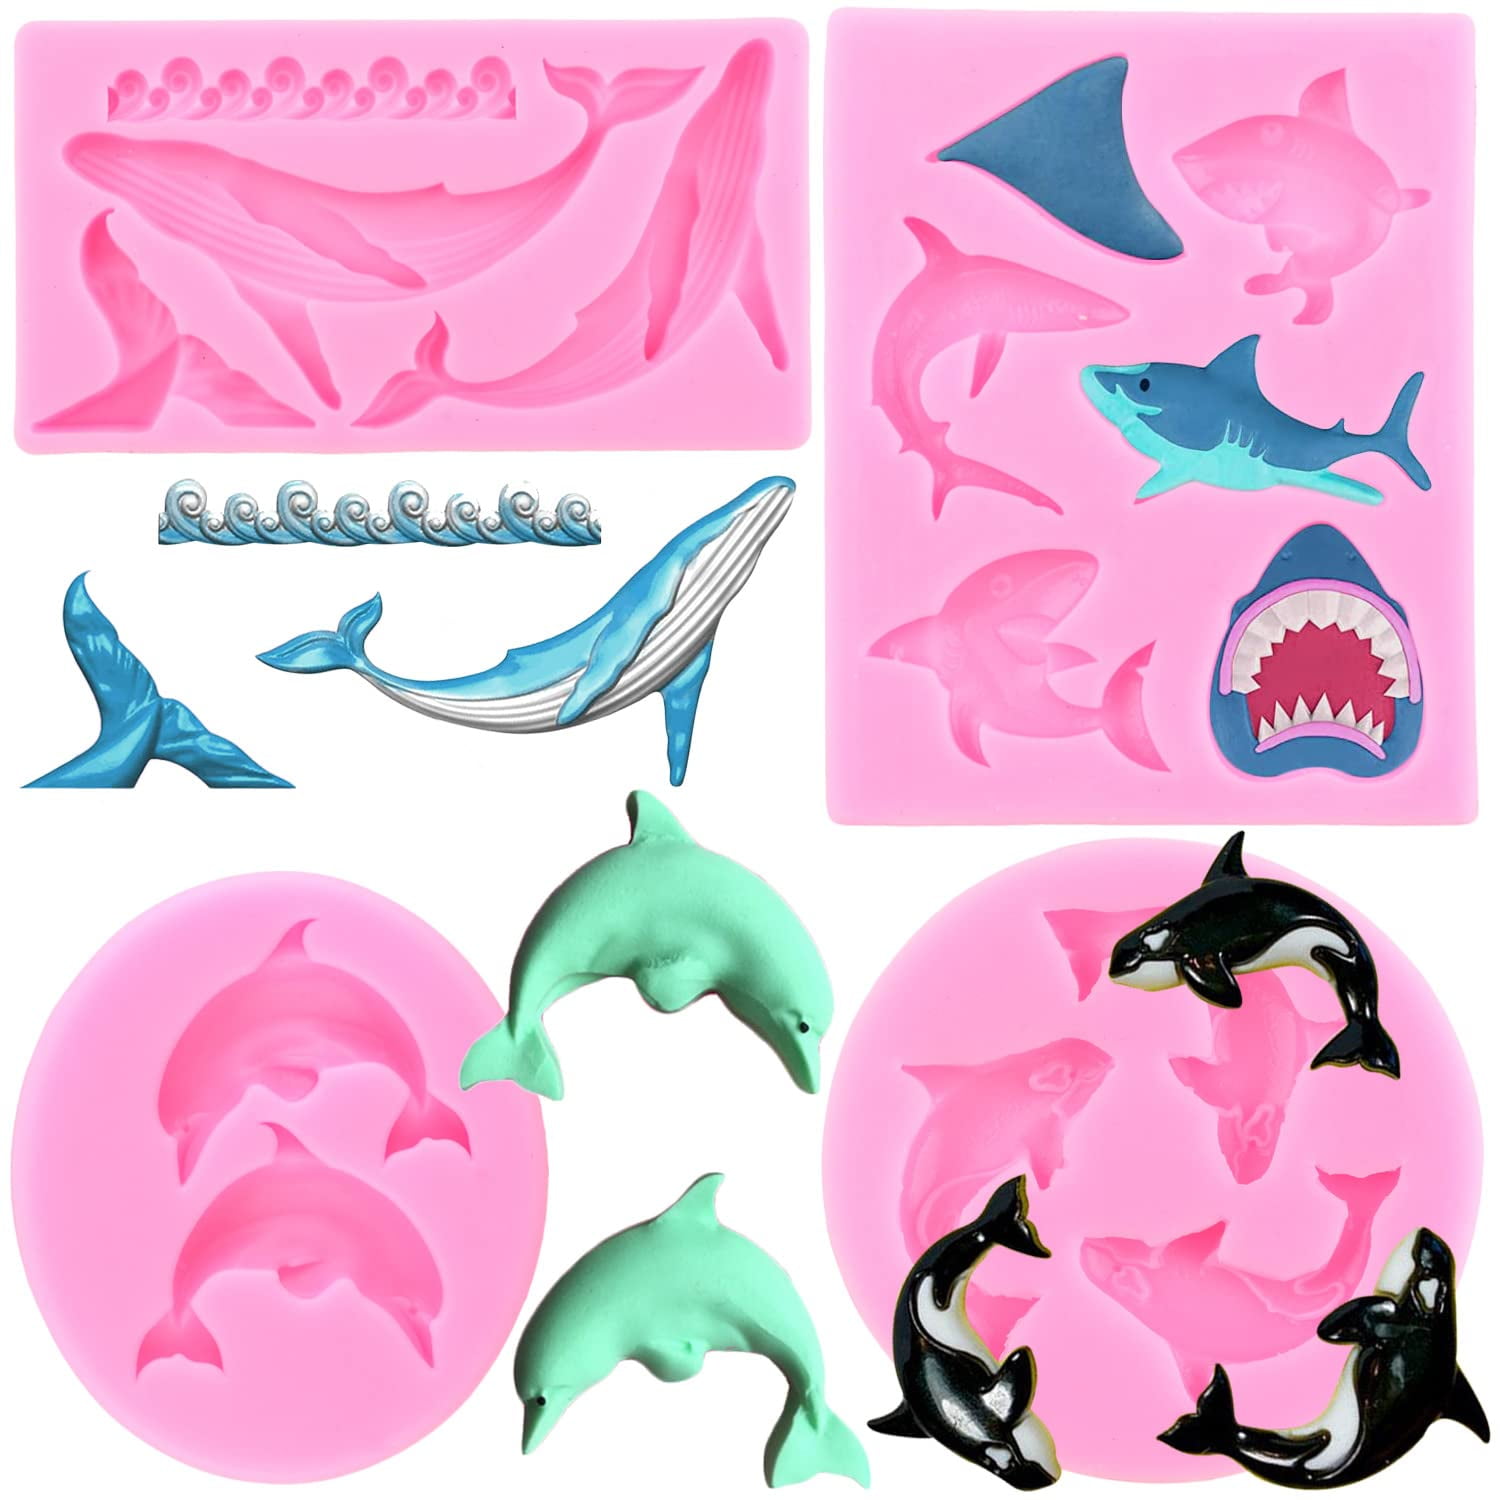 Shark, Jellyfish, & Seahorse Silicone Candy Mold - Party Time, Inc.